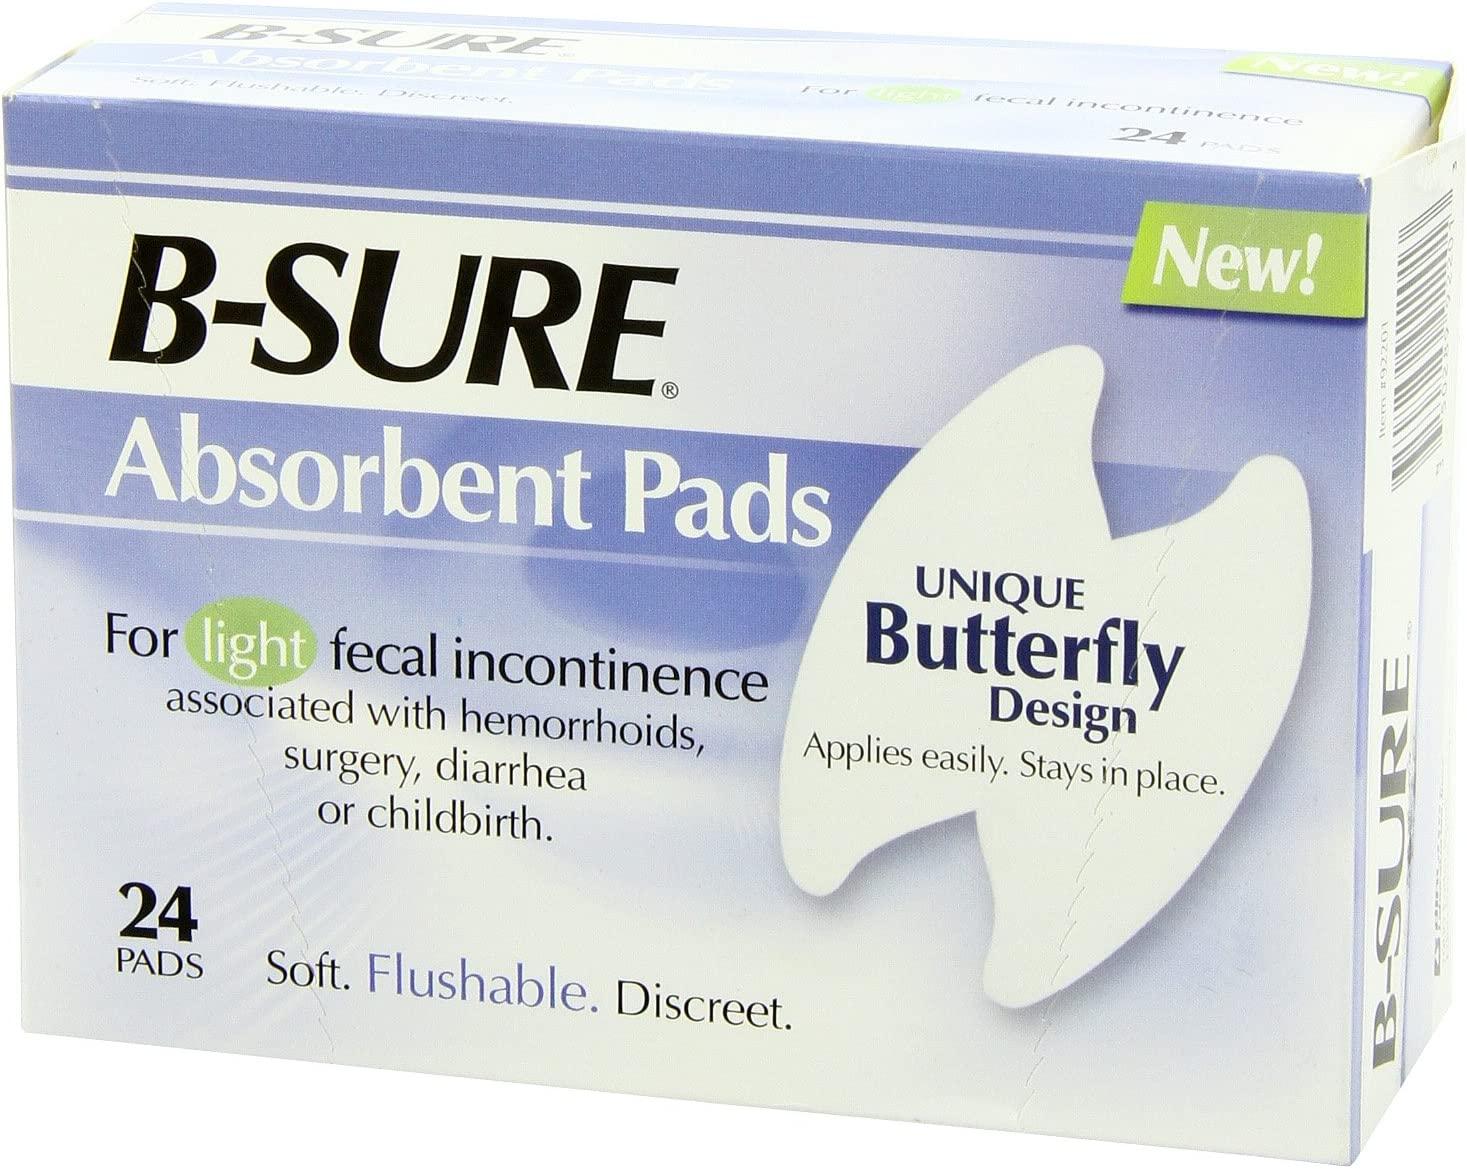 B-SURE Absorbent Fecal Incontinence Pad for light fecal